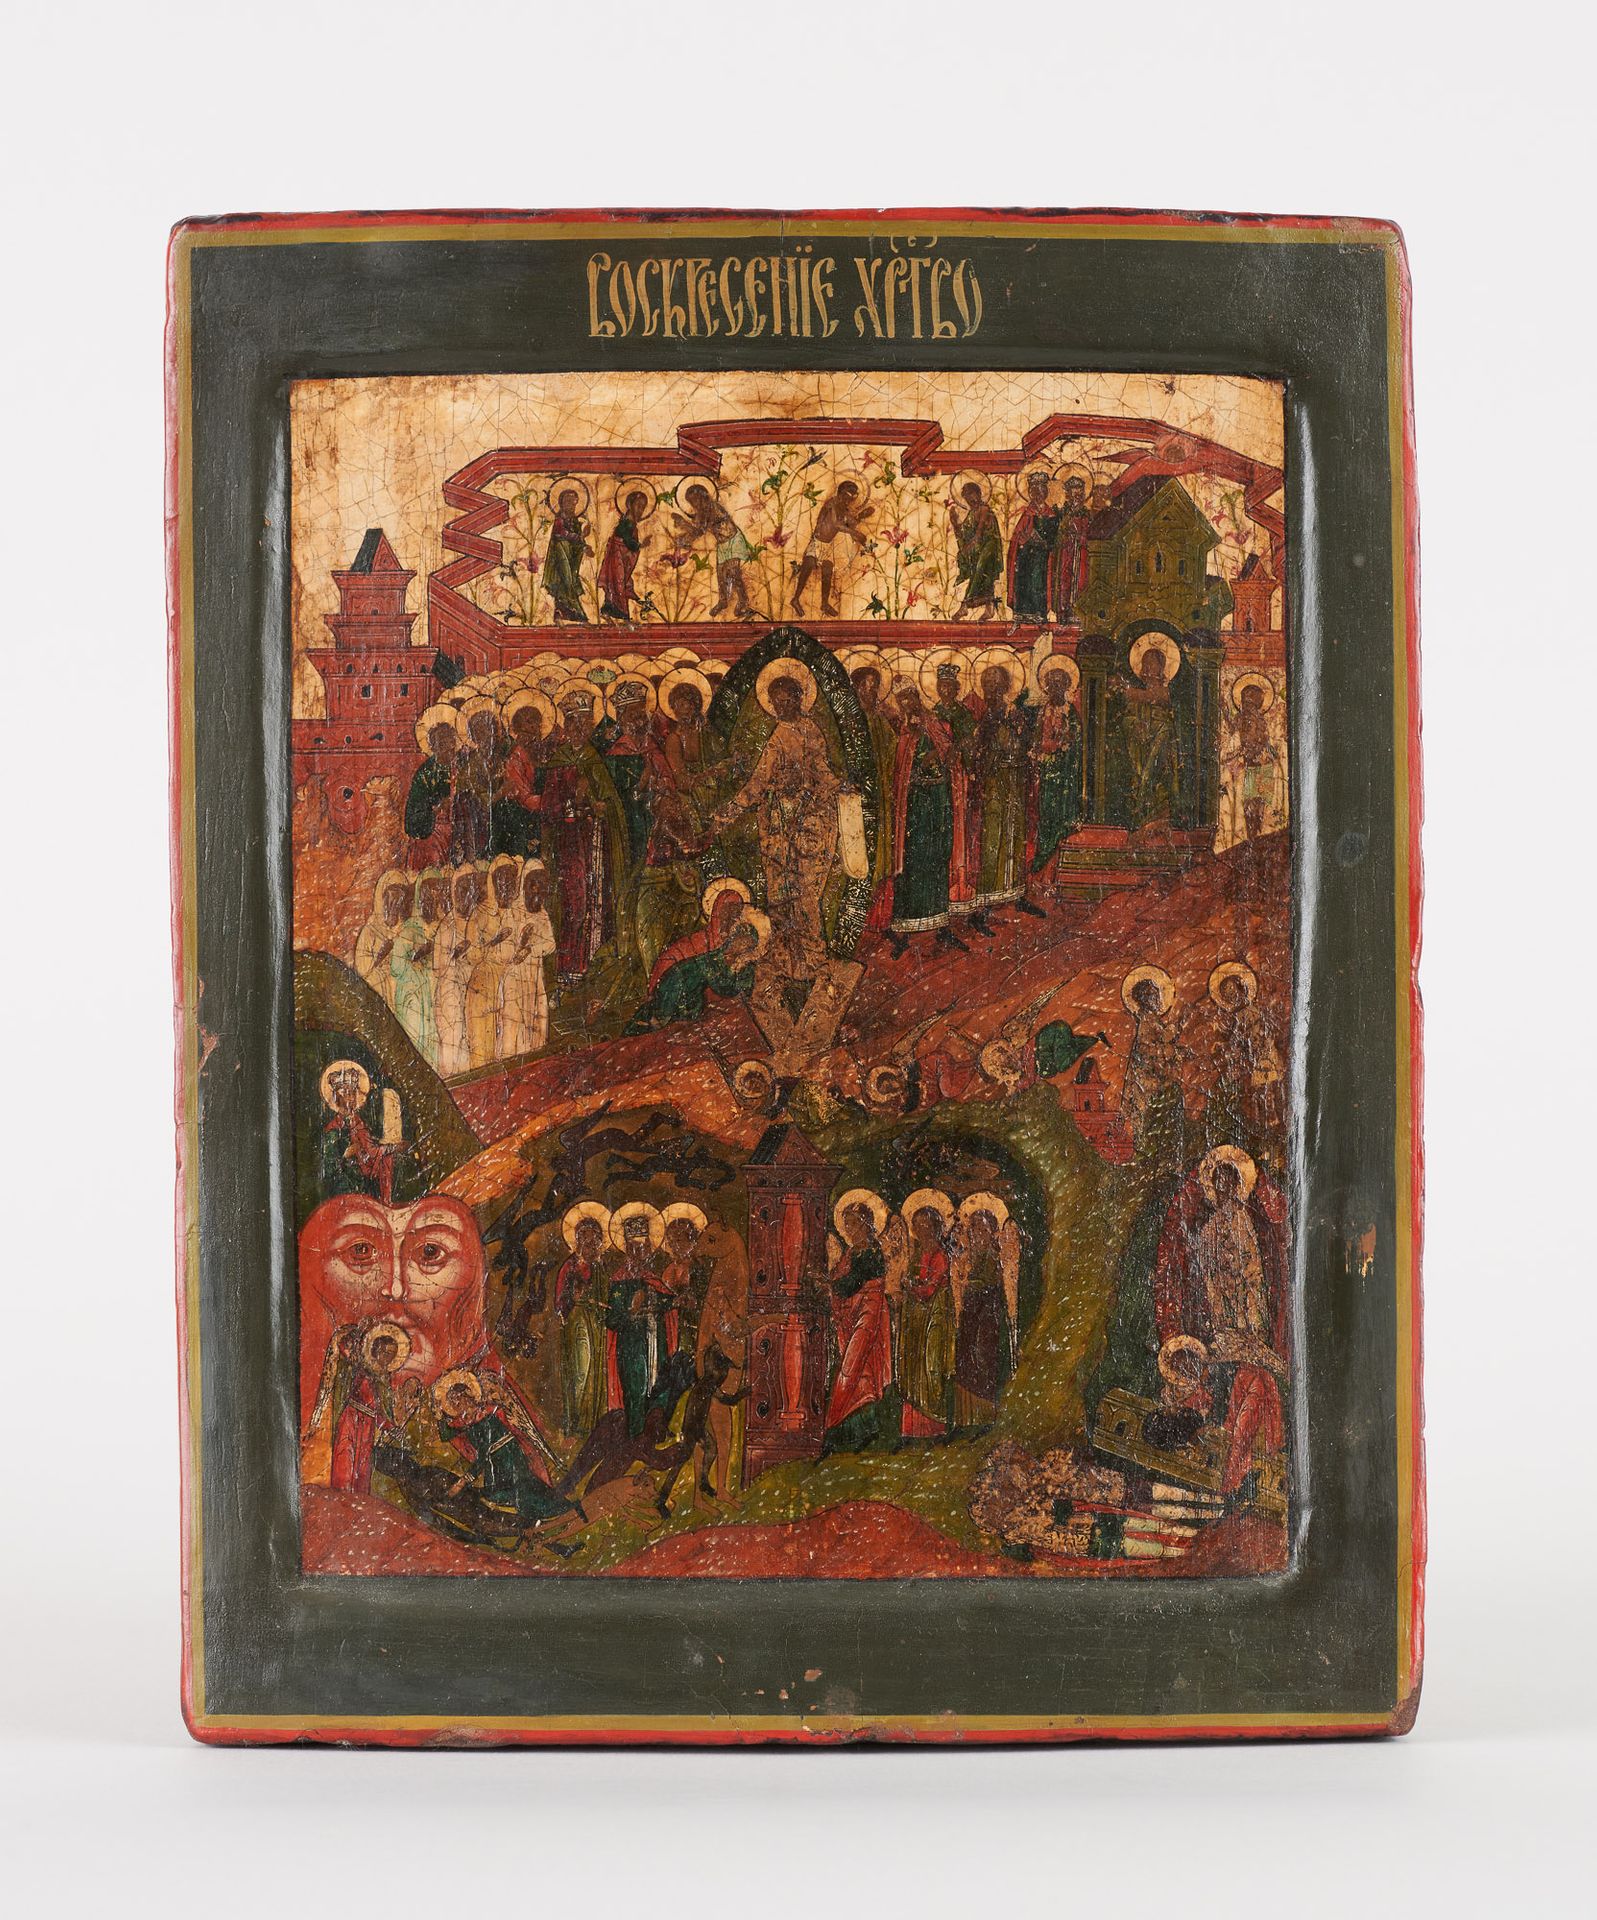 Travail russe. Icon on wood: The resurrection of Christ.

Size: 29 x 24 cm.